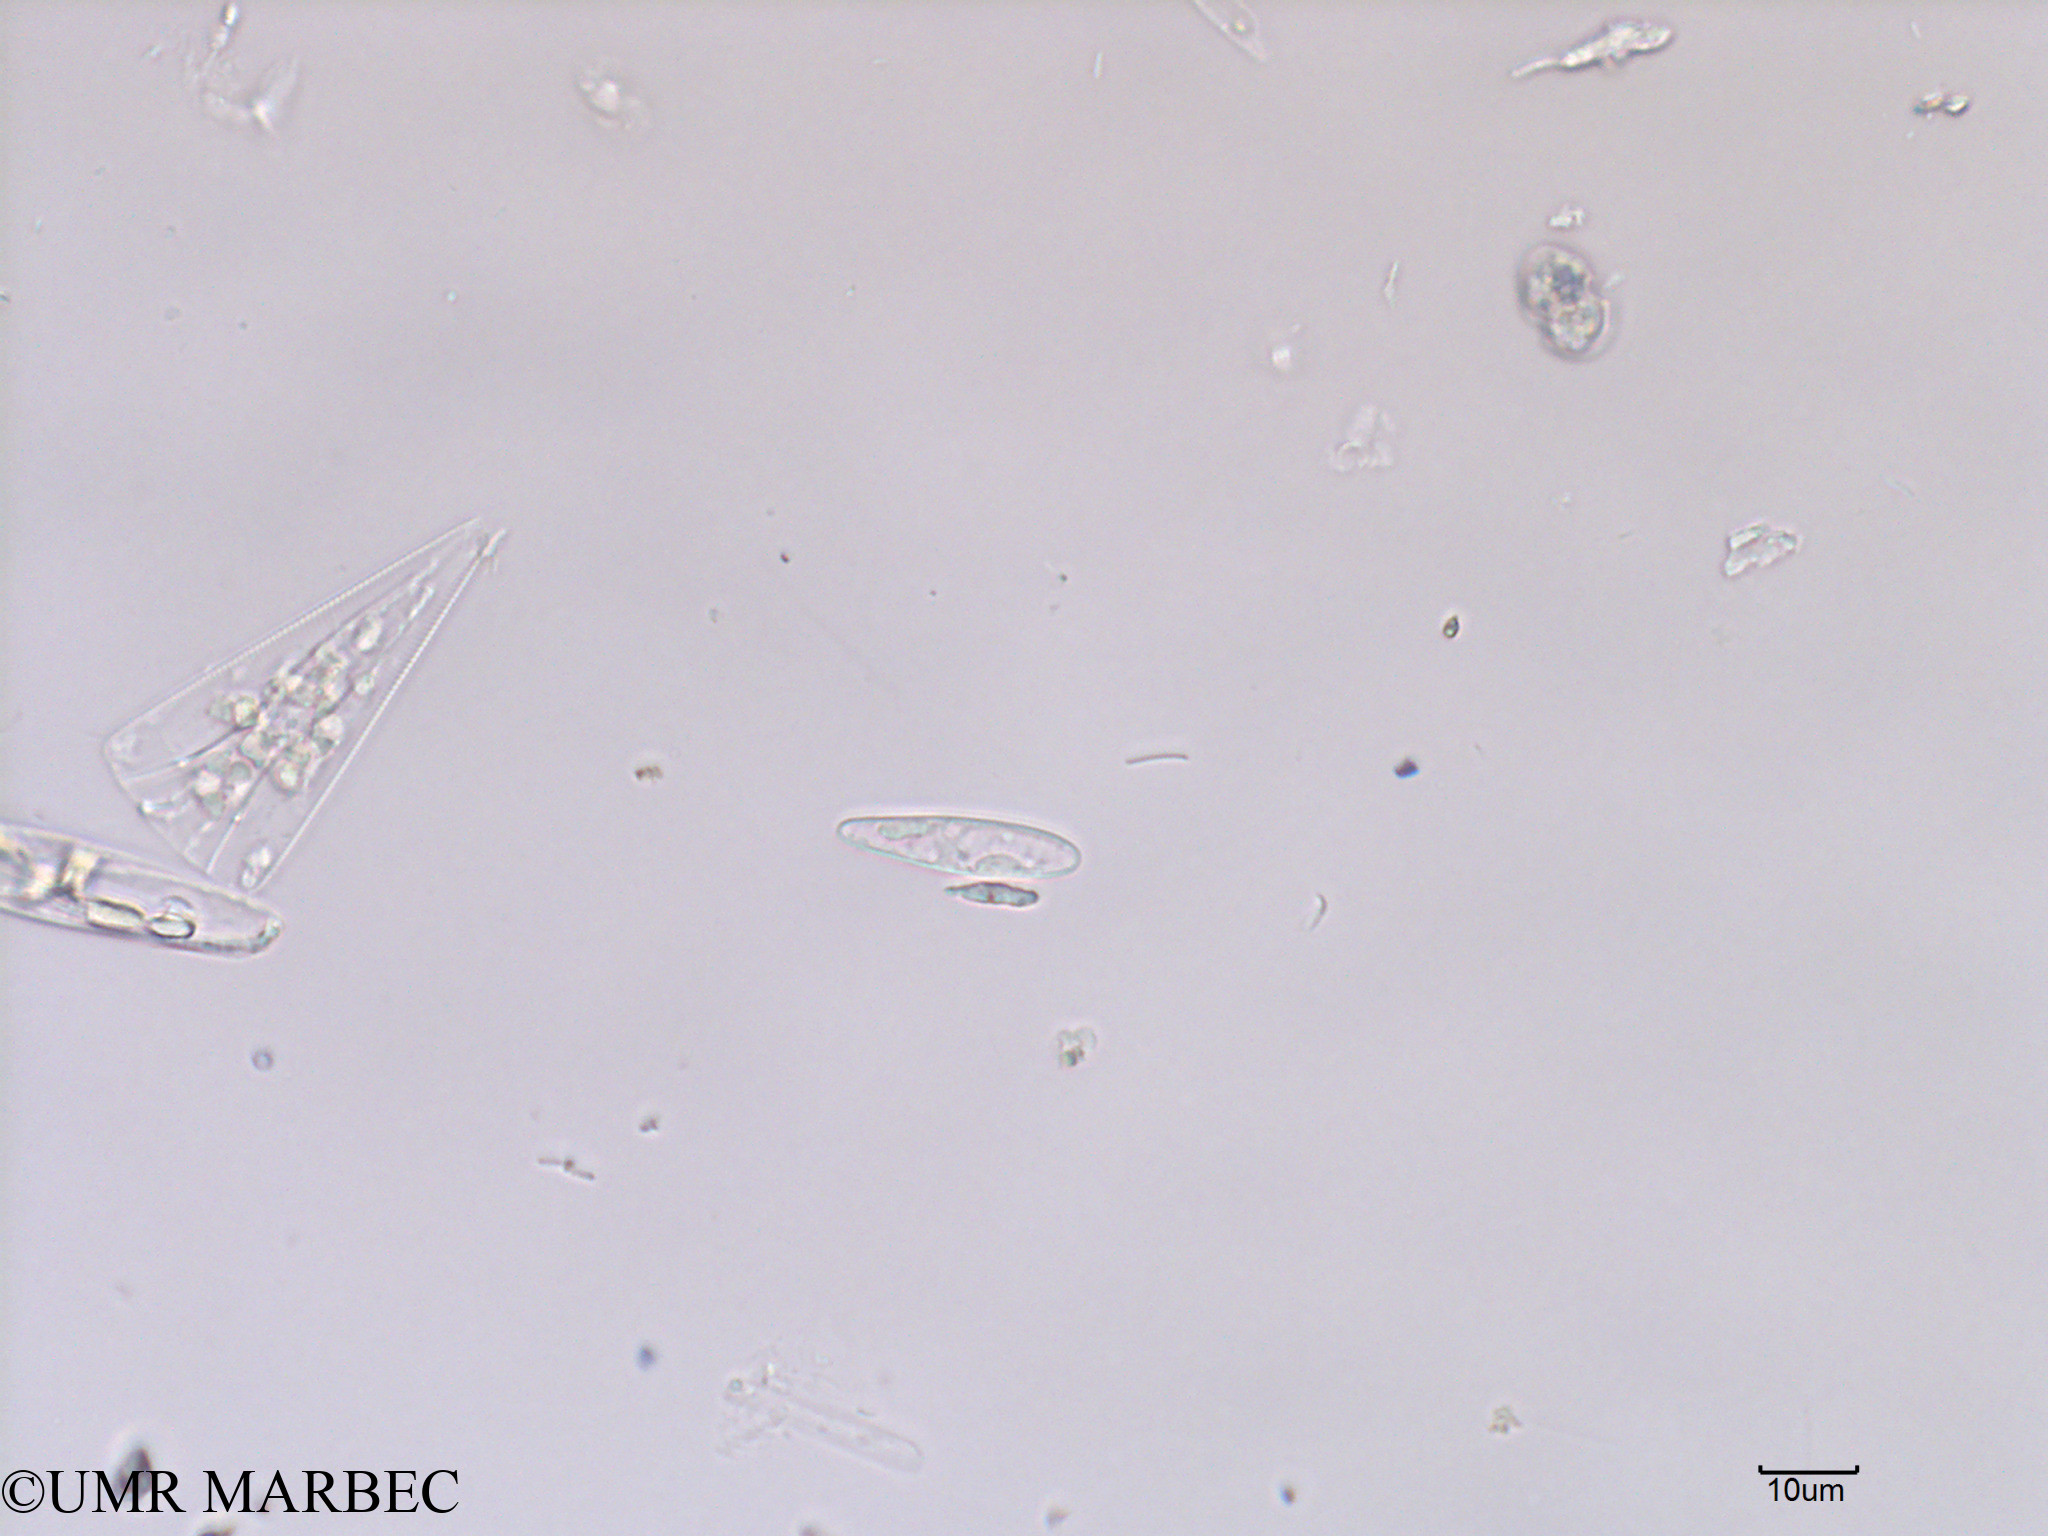 phyto/Scattered_Islands/iles_glorieuses/SIREME May 2016/Gomphonema sp2 (old Pennée spp 3-5x15-40µm -SIREME-Glorieuses2016-GLO5surf-191016-indeter3-1)(copy).jpg